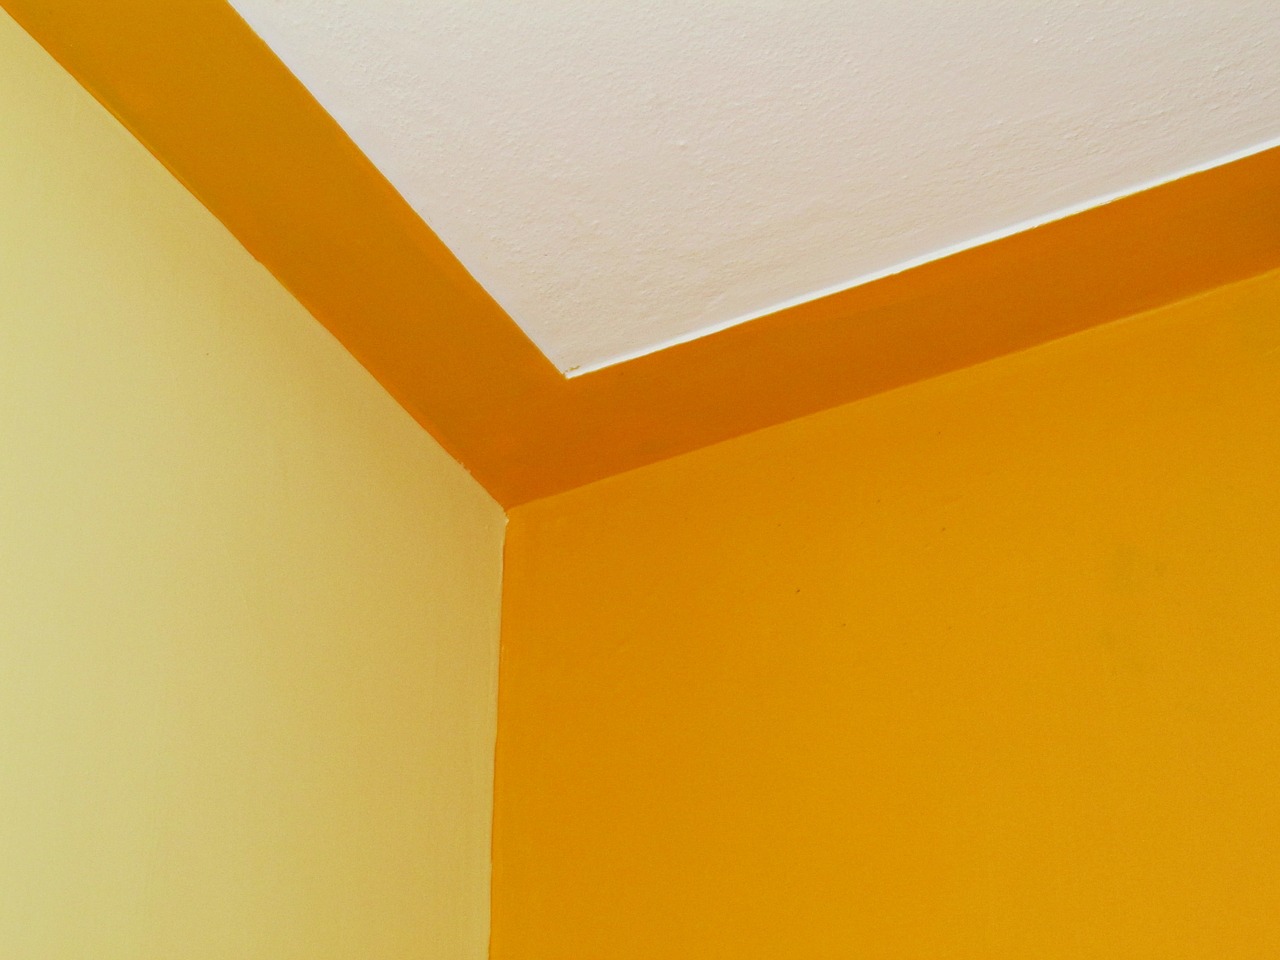 Edge Room Wall Ceiling Color Combination Free Image From